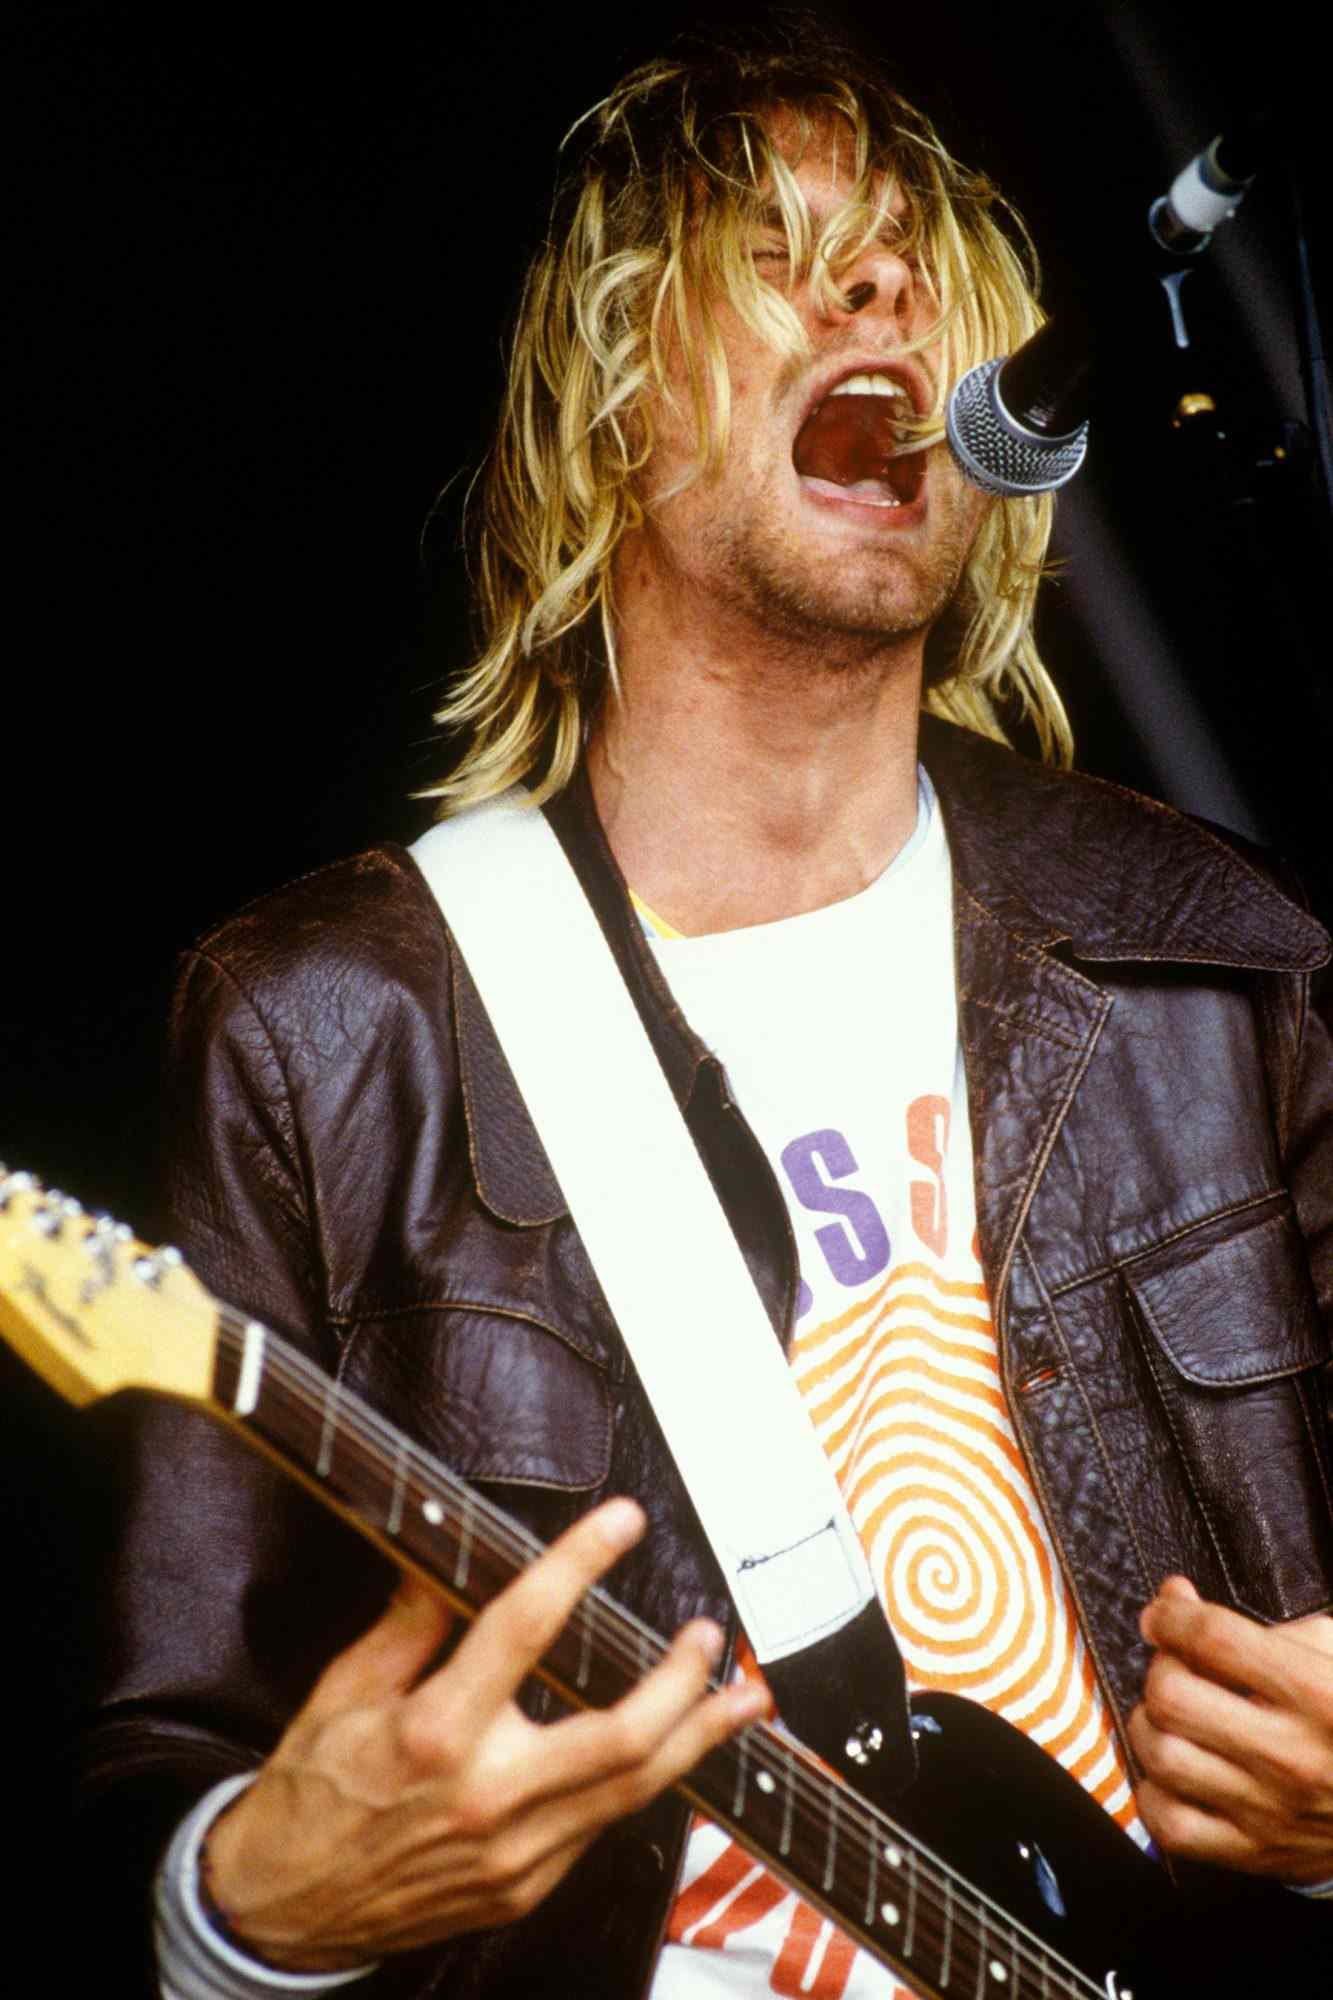 Kurt Cobain Performing at the Reading Festival on&nbsp;August 23, 1991